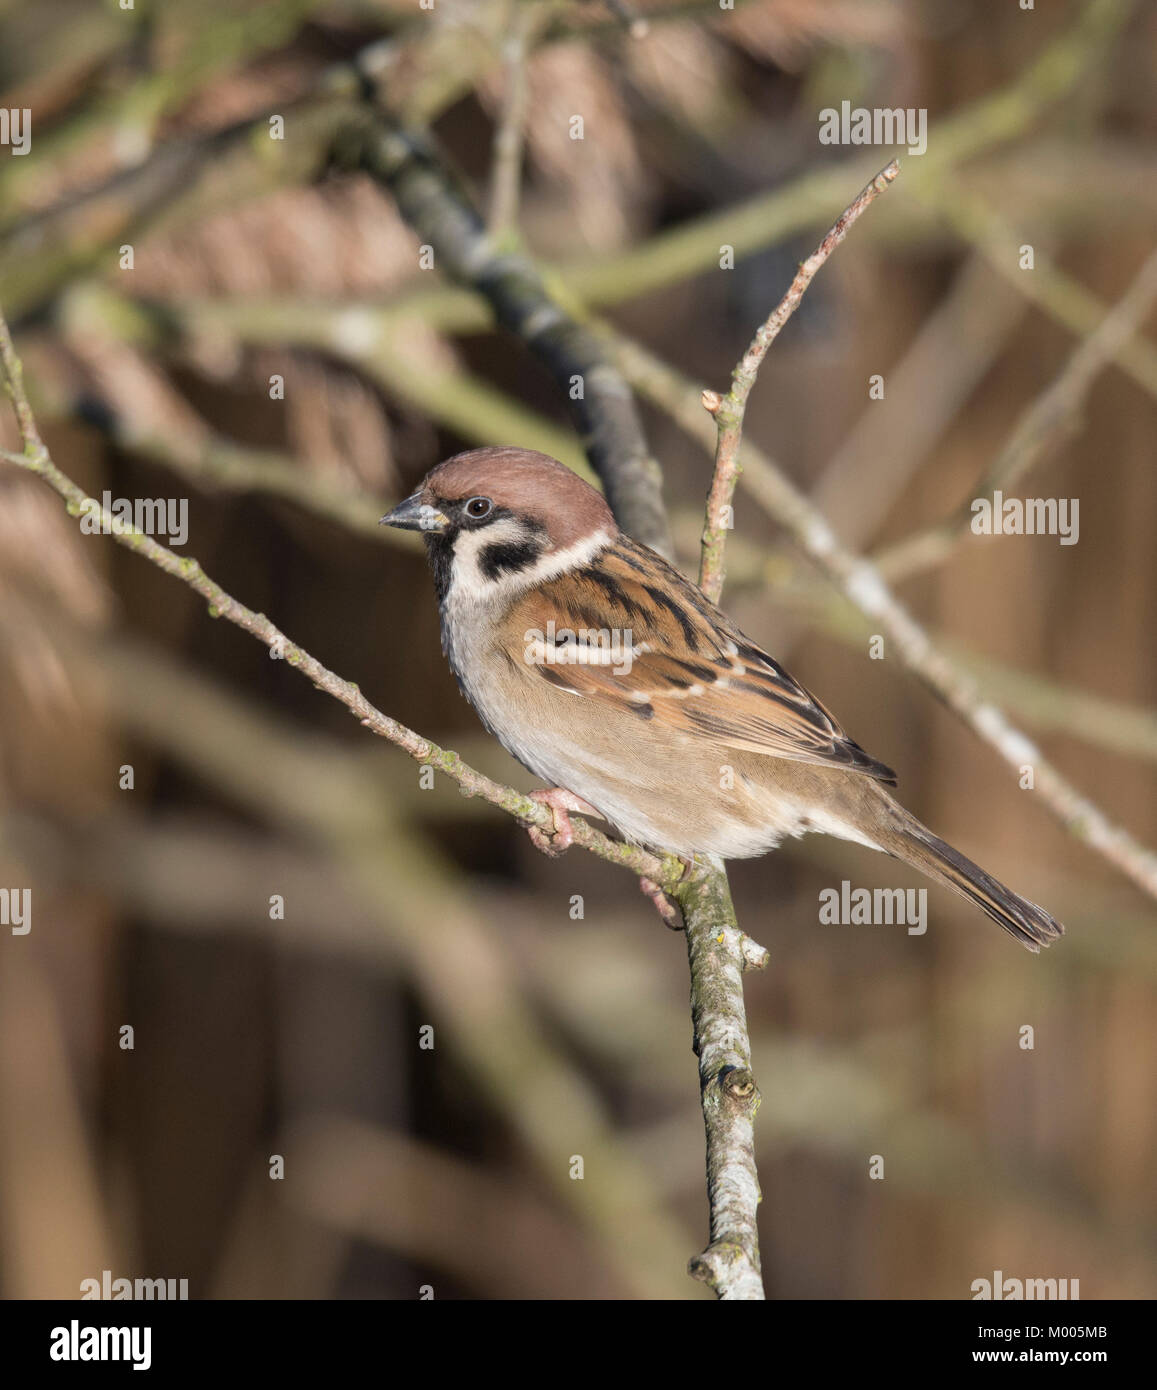 Eurasian tree sparrow (Passer montanus) perched on branch, Staveley Nature Reserve, United Kingdom. Stock Photo